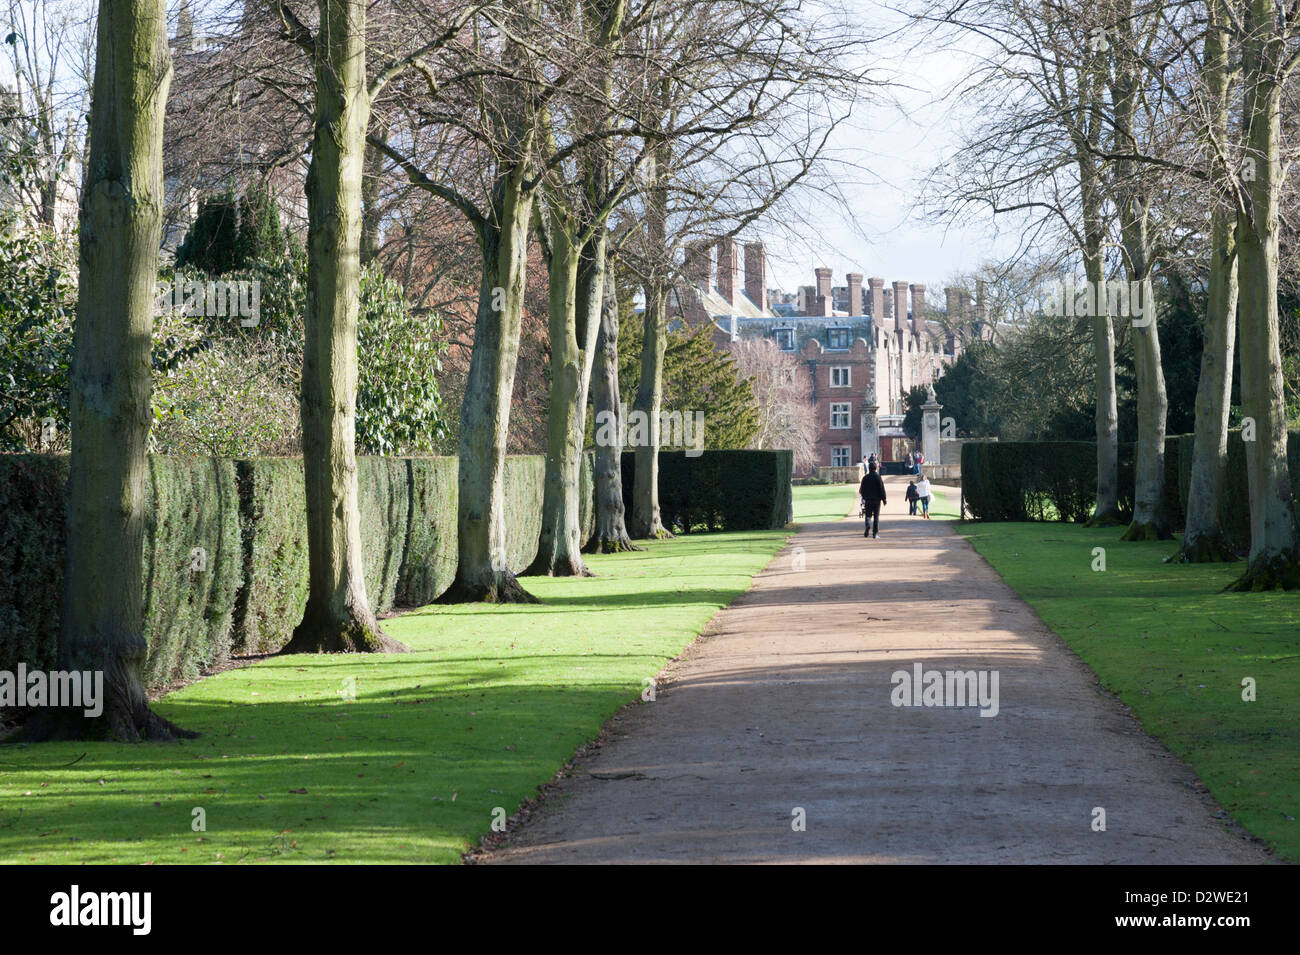 A tree lined avenue at the rear of Trinity College Cambridge UK, part of Cambridge University Stock Photo